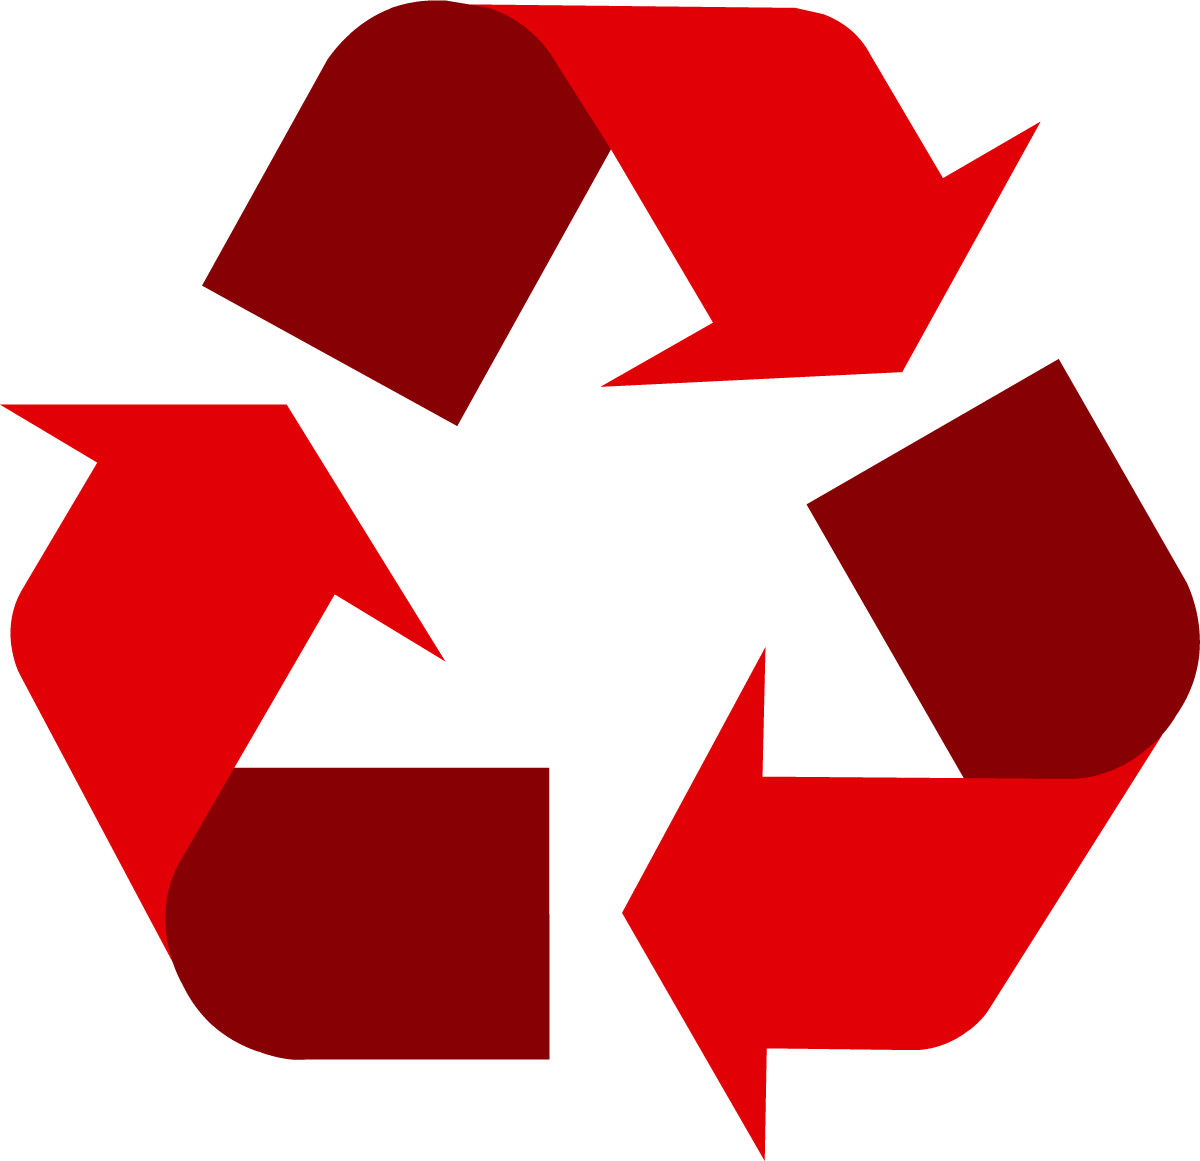 Red Recycle Logo - Recycling Symbol the Original Recycle Logo